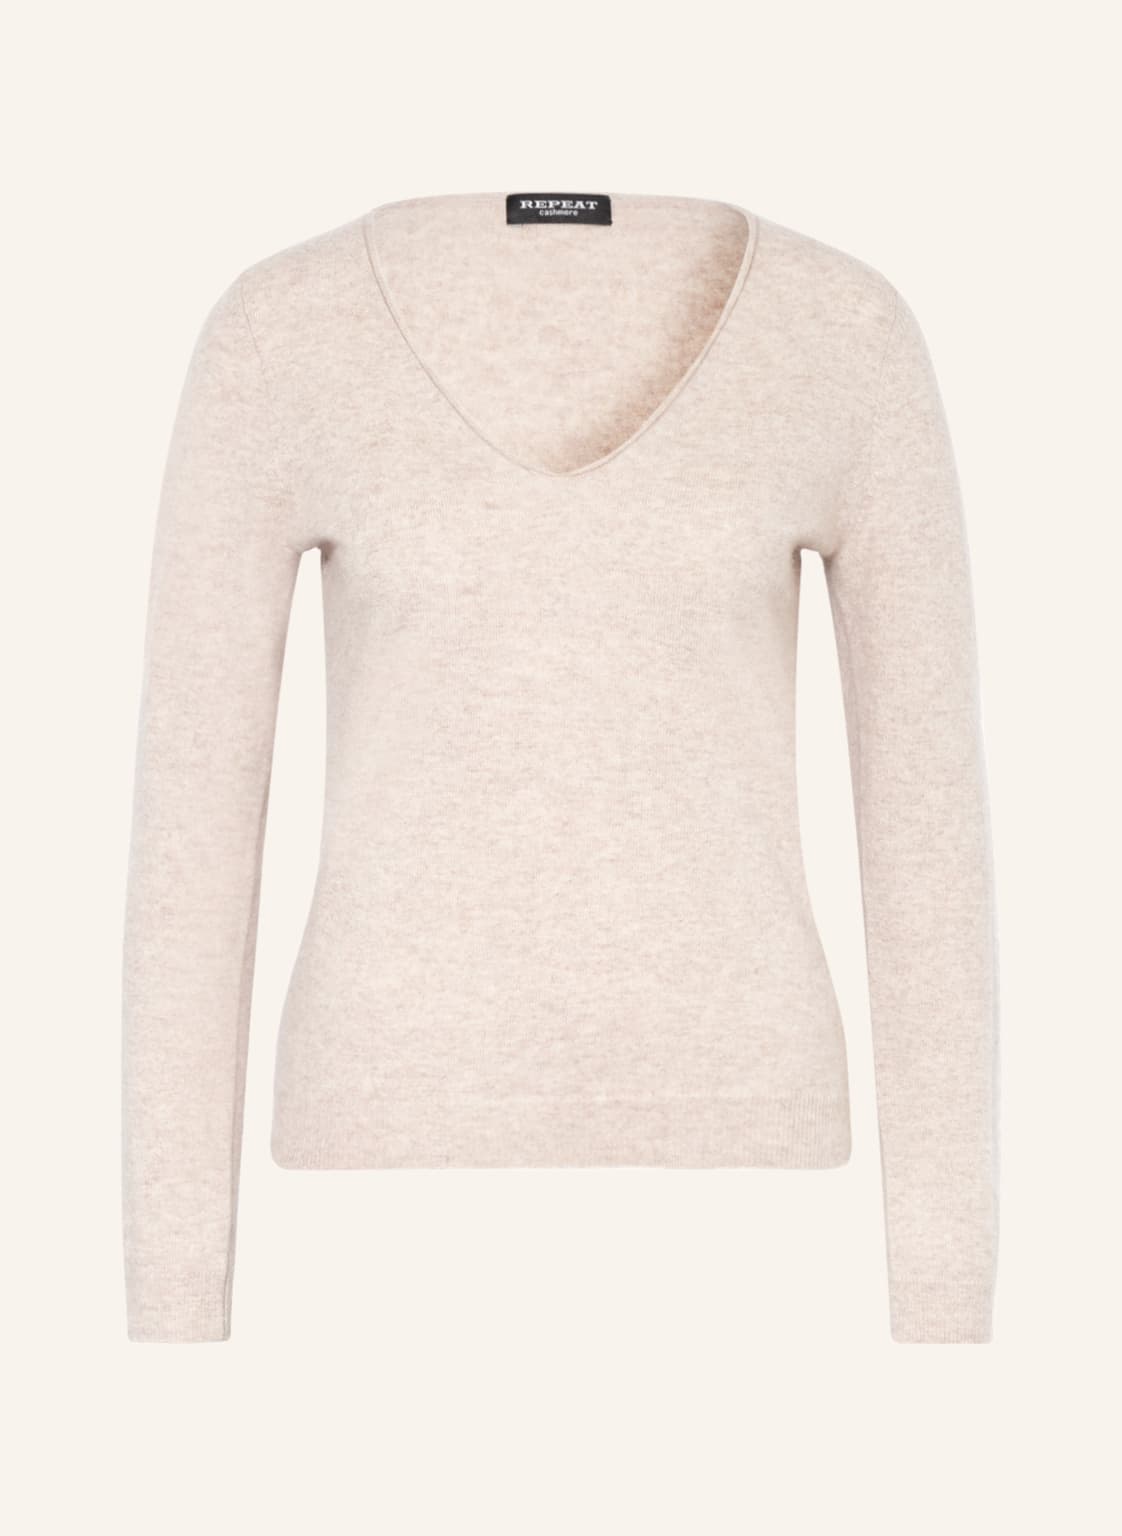 Image of Repeat Cashmere-Pullover beige